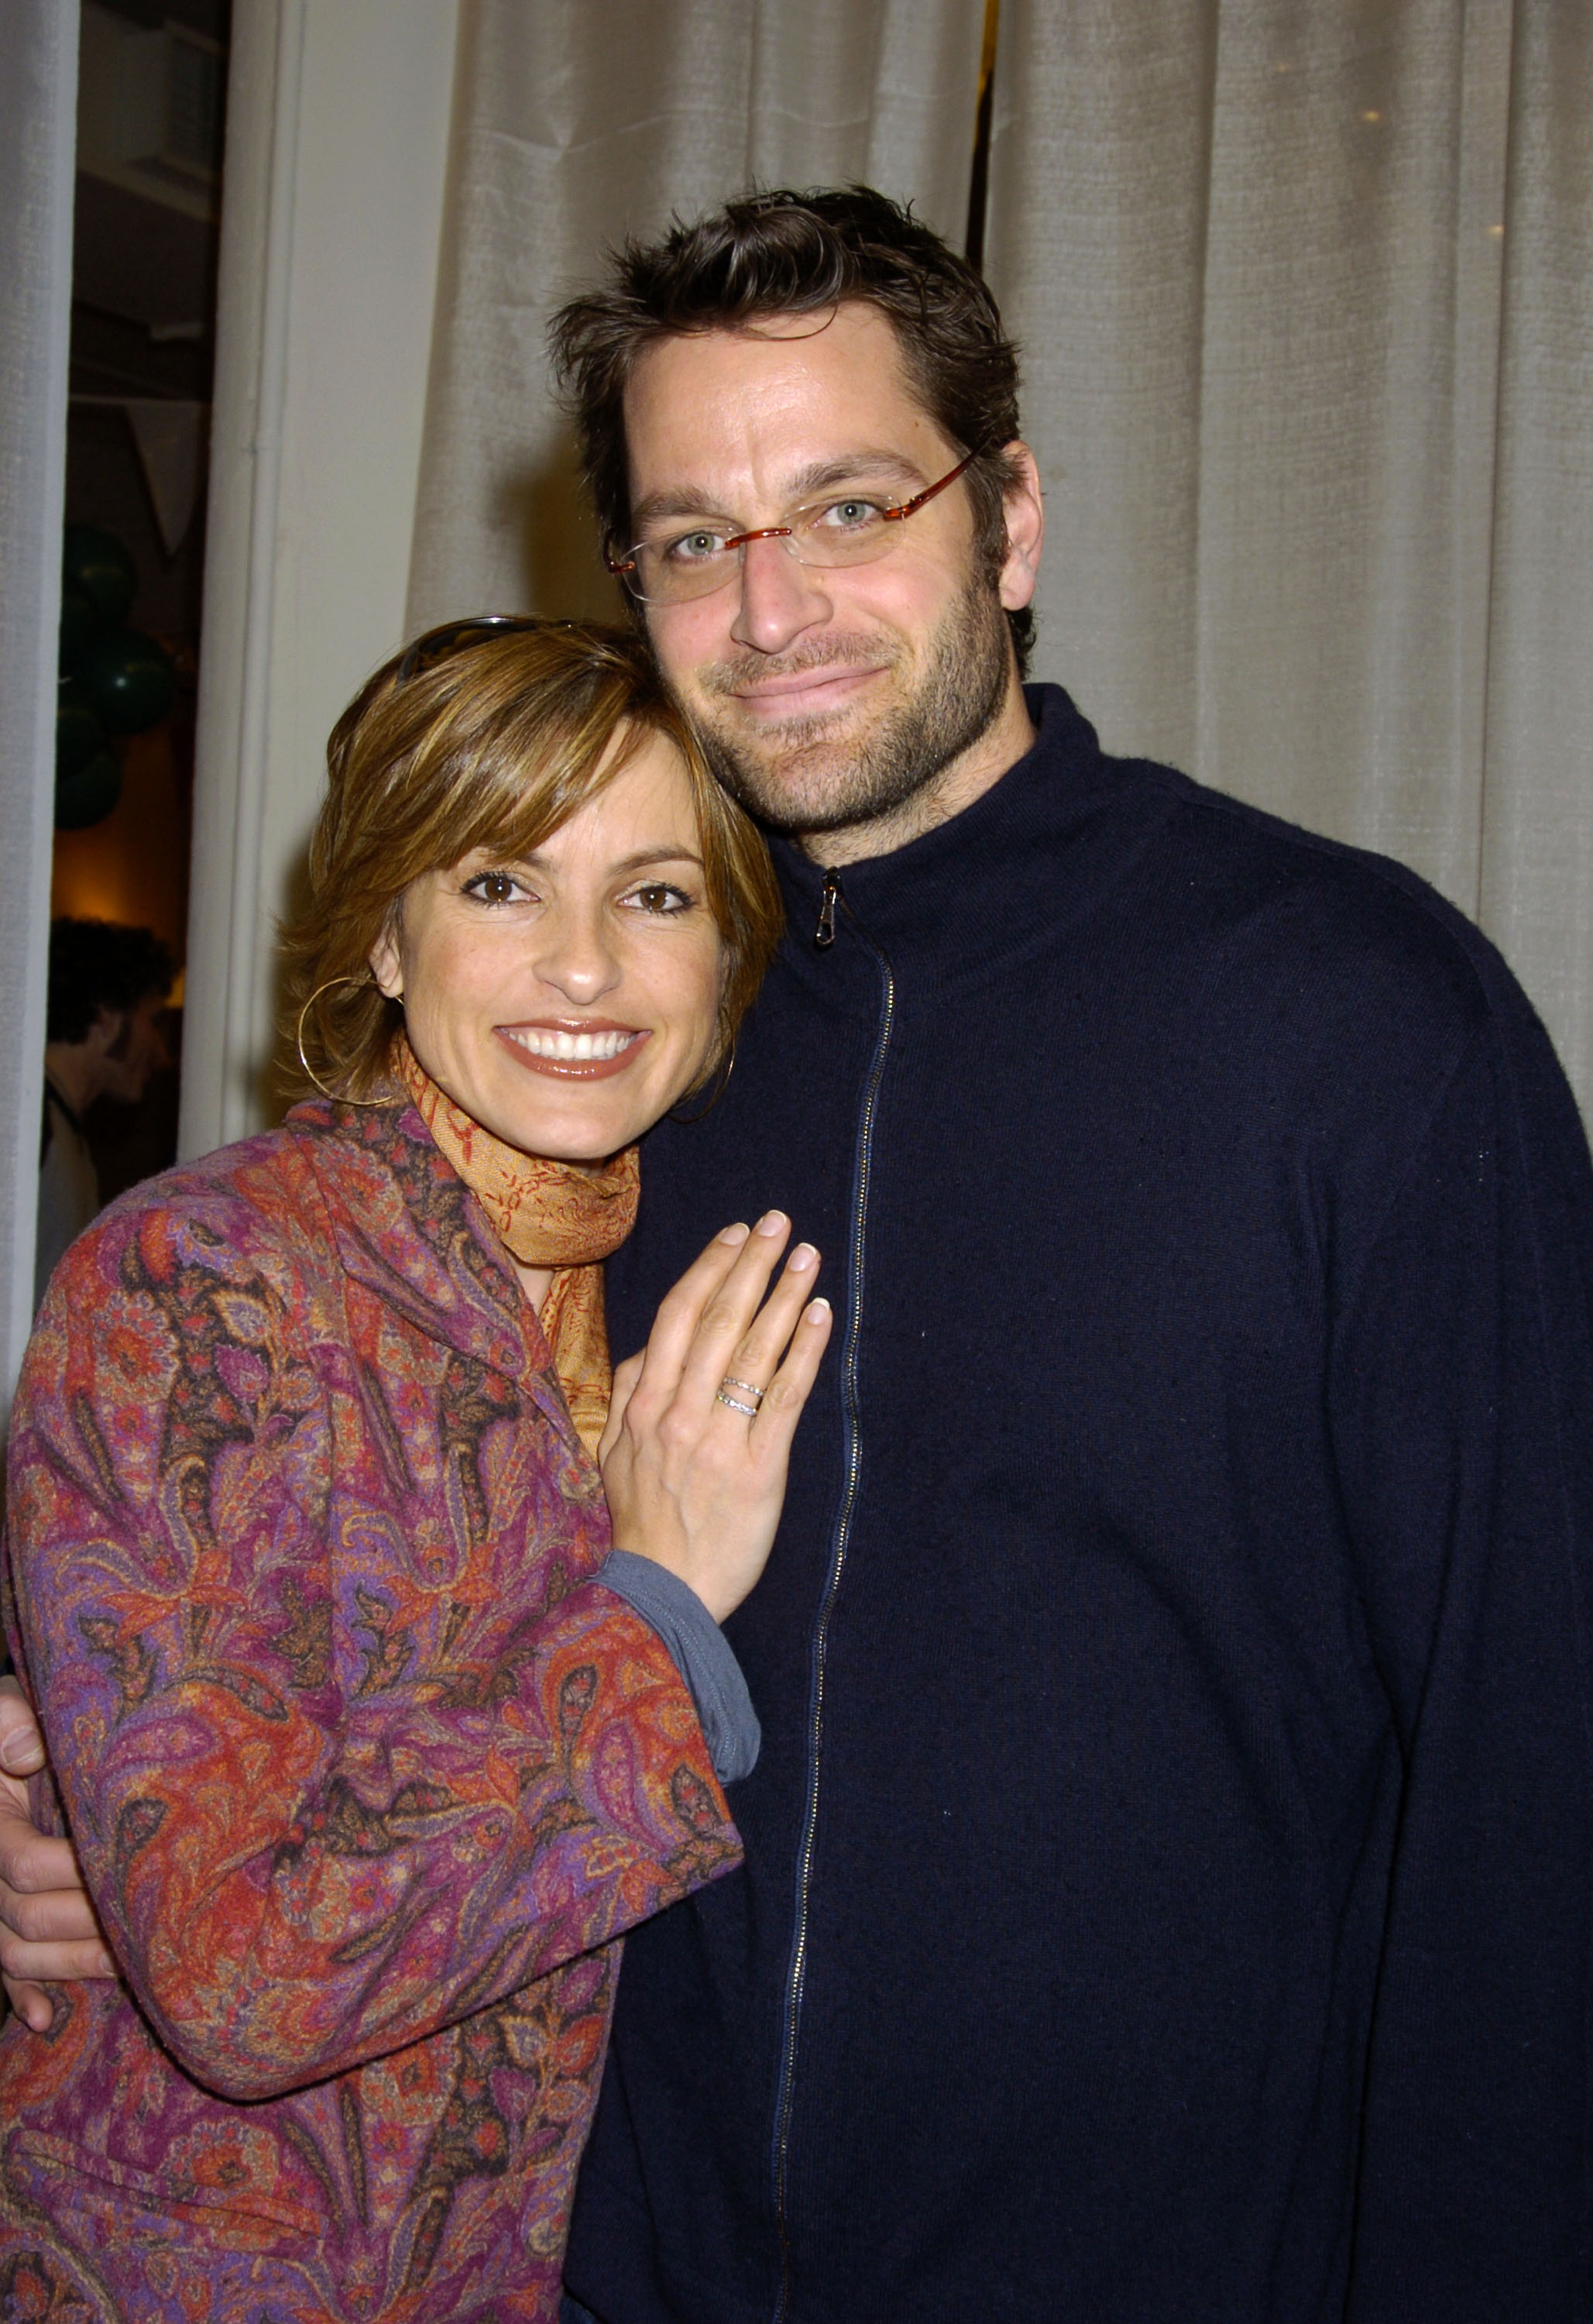 Mariska Hargitay and Peter Hermann at the 3rd Annual "Children's Day Artrageous" in New York City, 2004 | Source: Getty Images